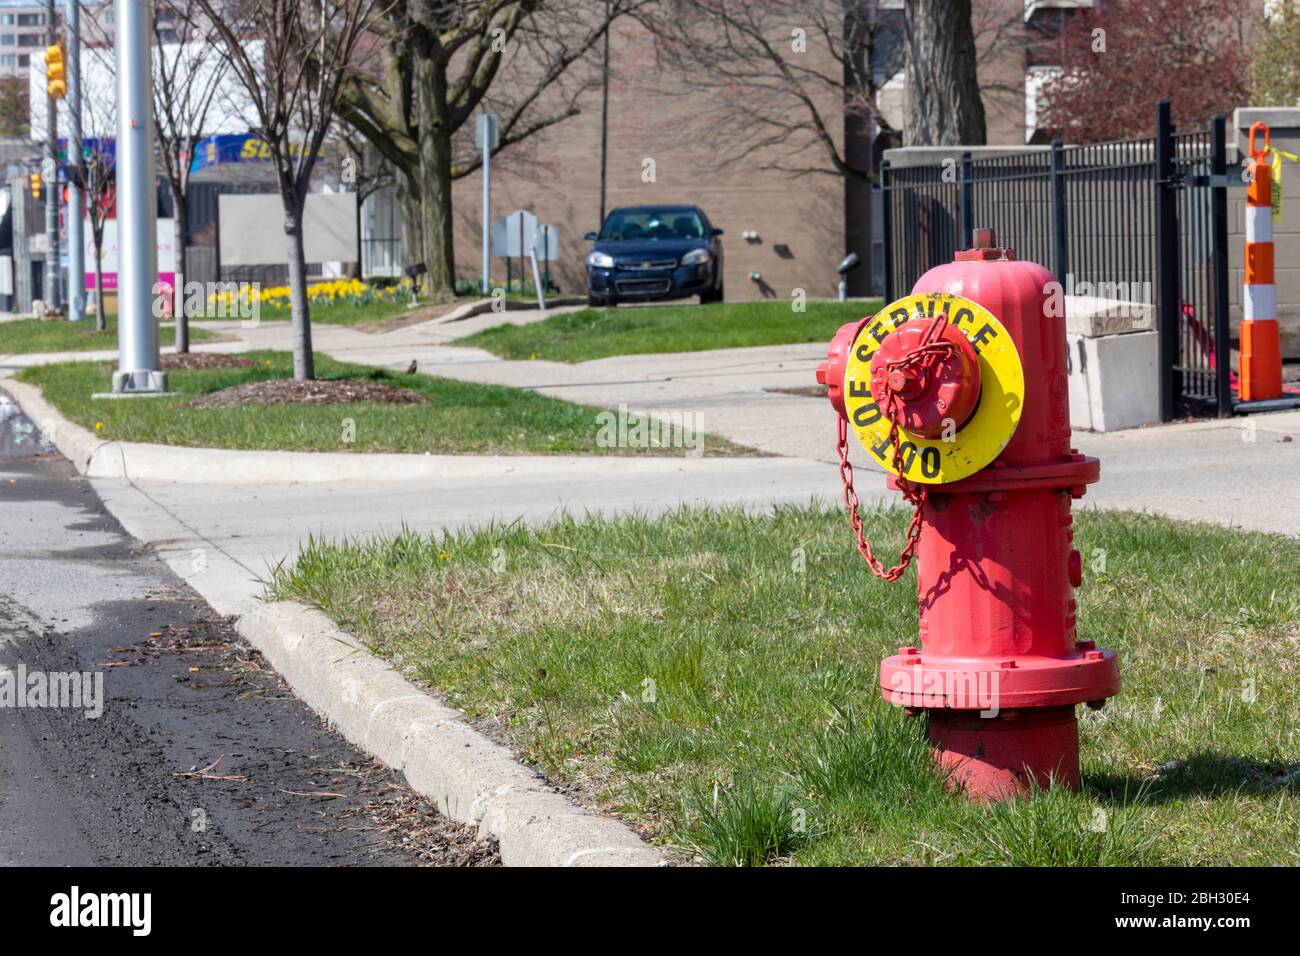 Detroit, Michigan - An out-of-service fire hydrant. Stock Photo